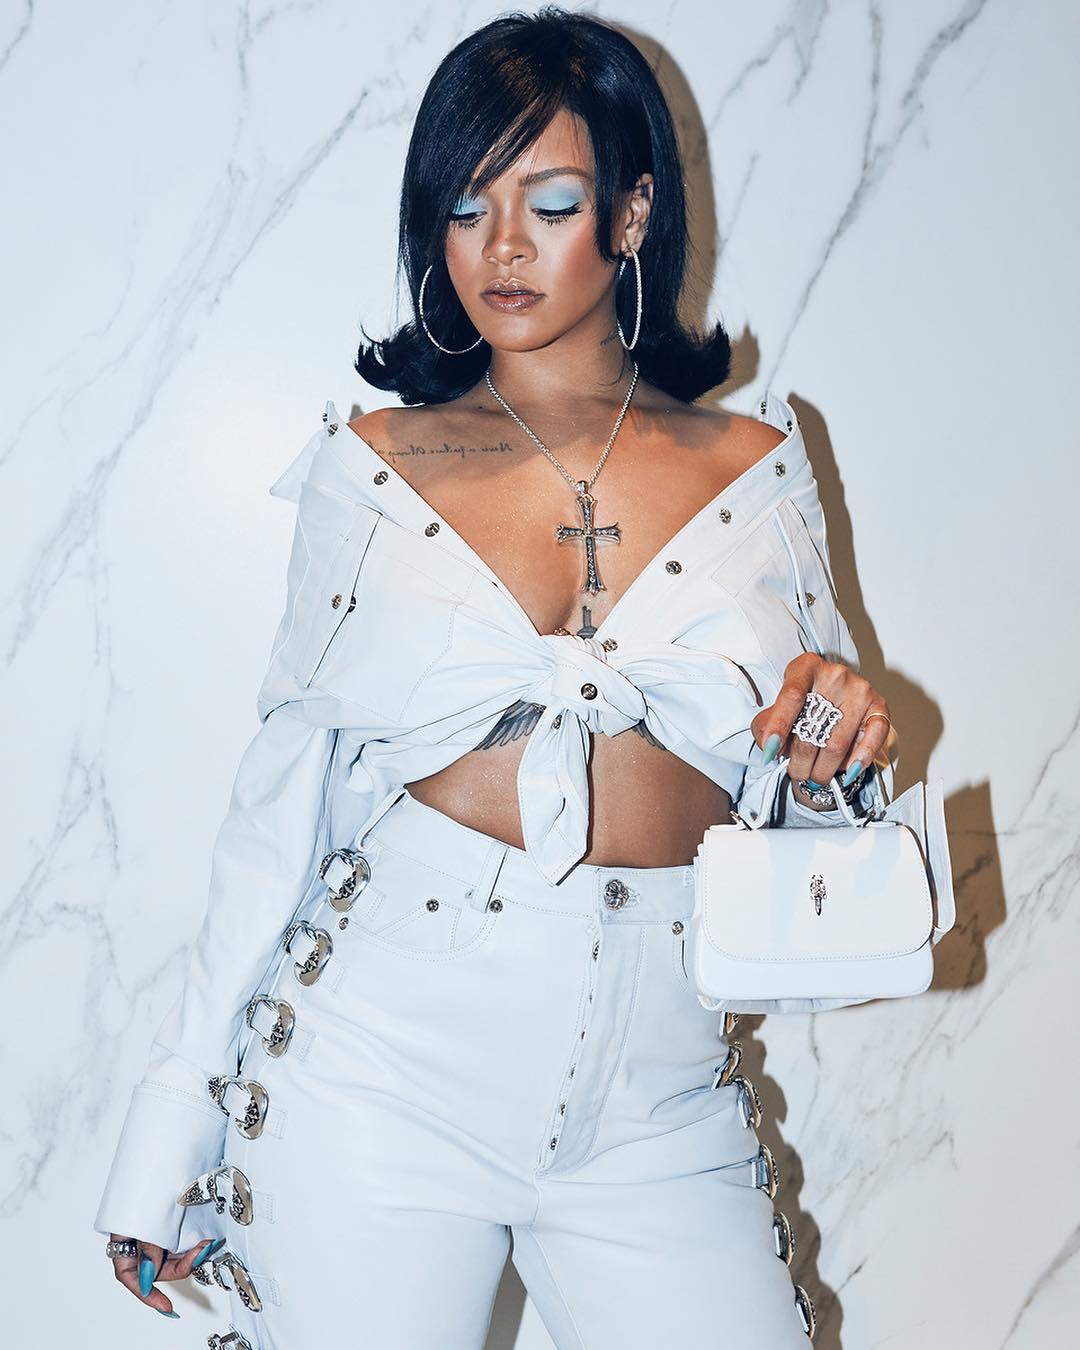 bad-girl-riri-kicked-off-coachella-2018-with-60s-vibe-fun-looks-from-other-celebs-and-influencers